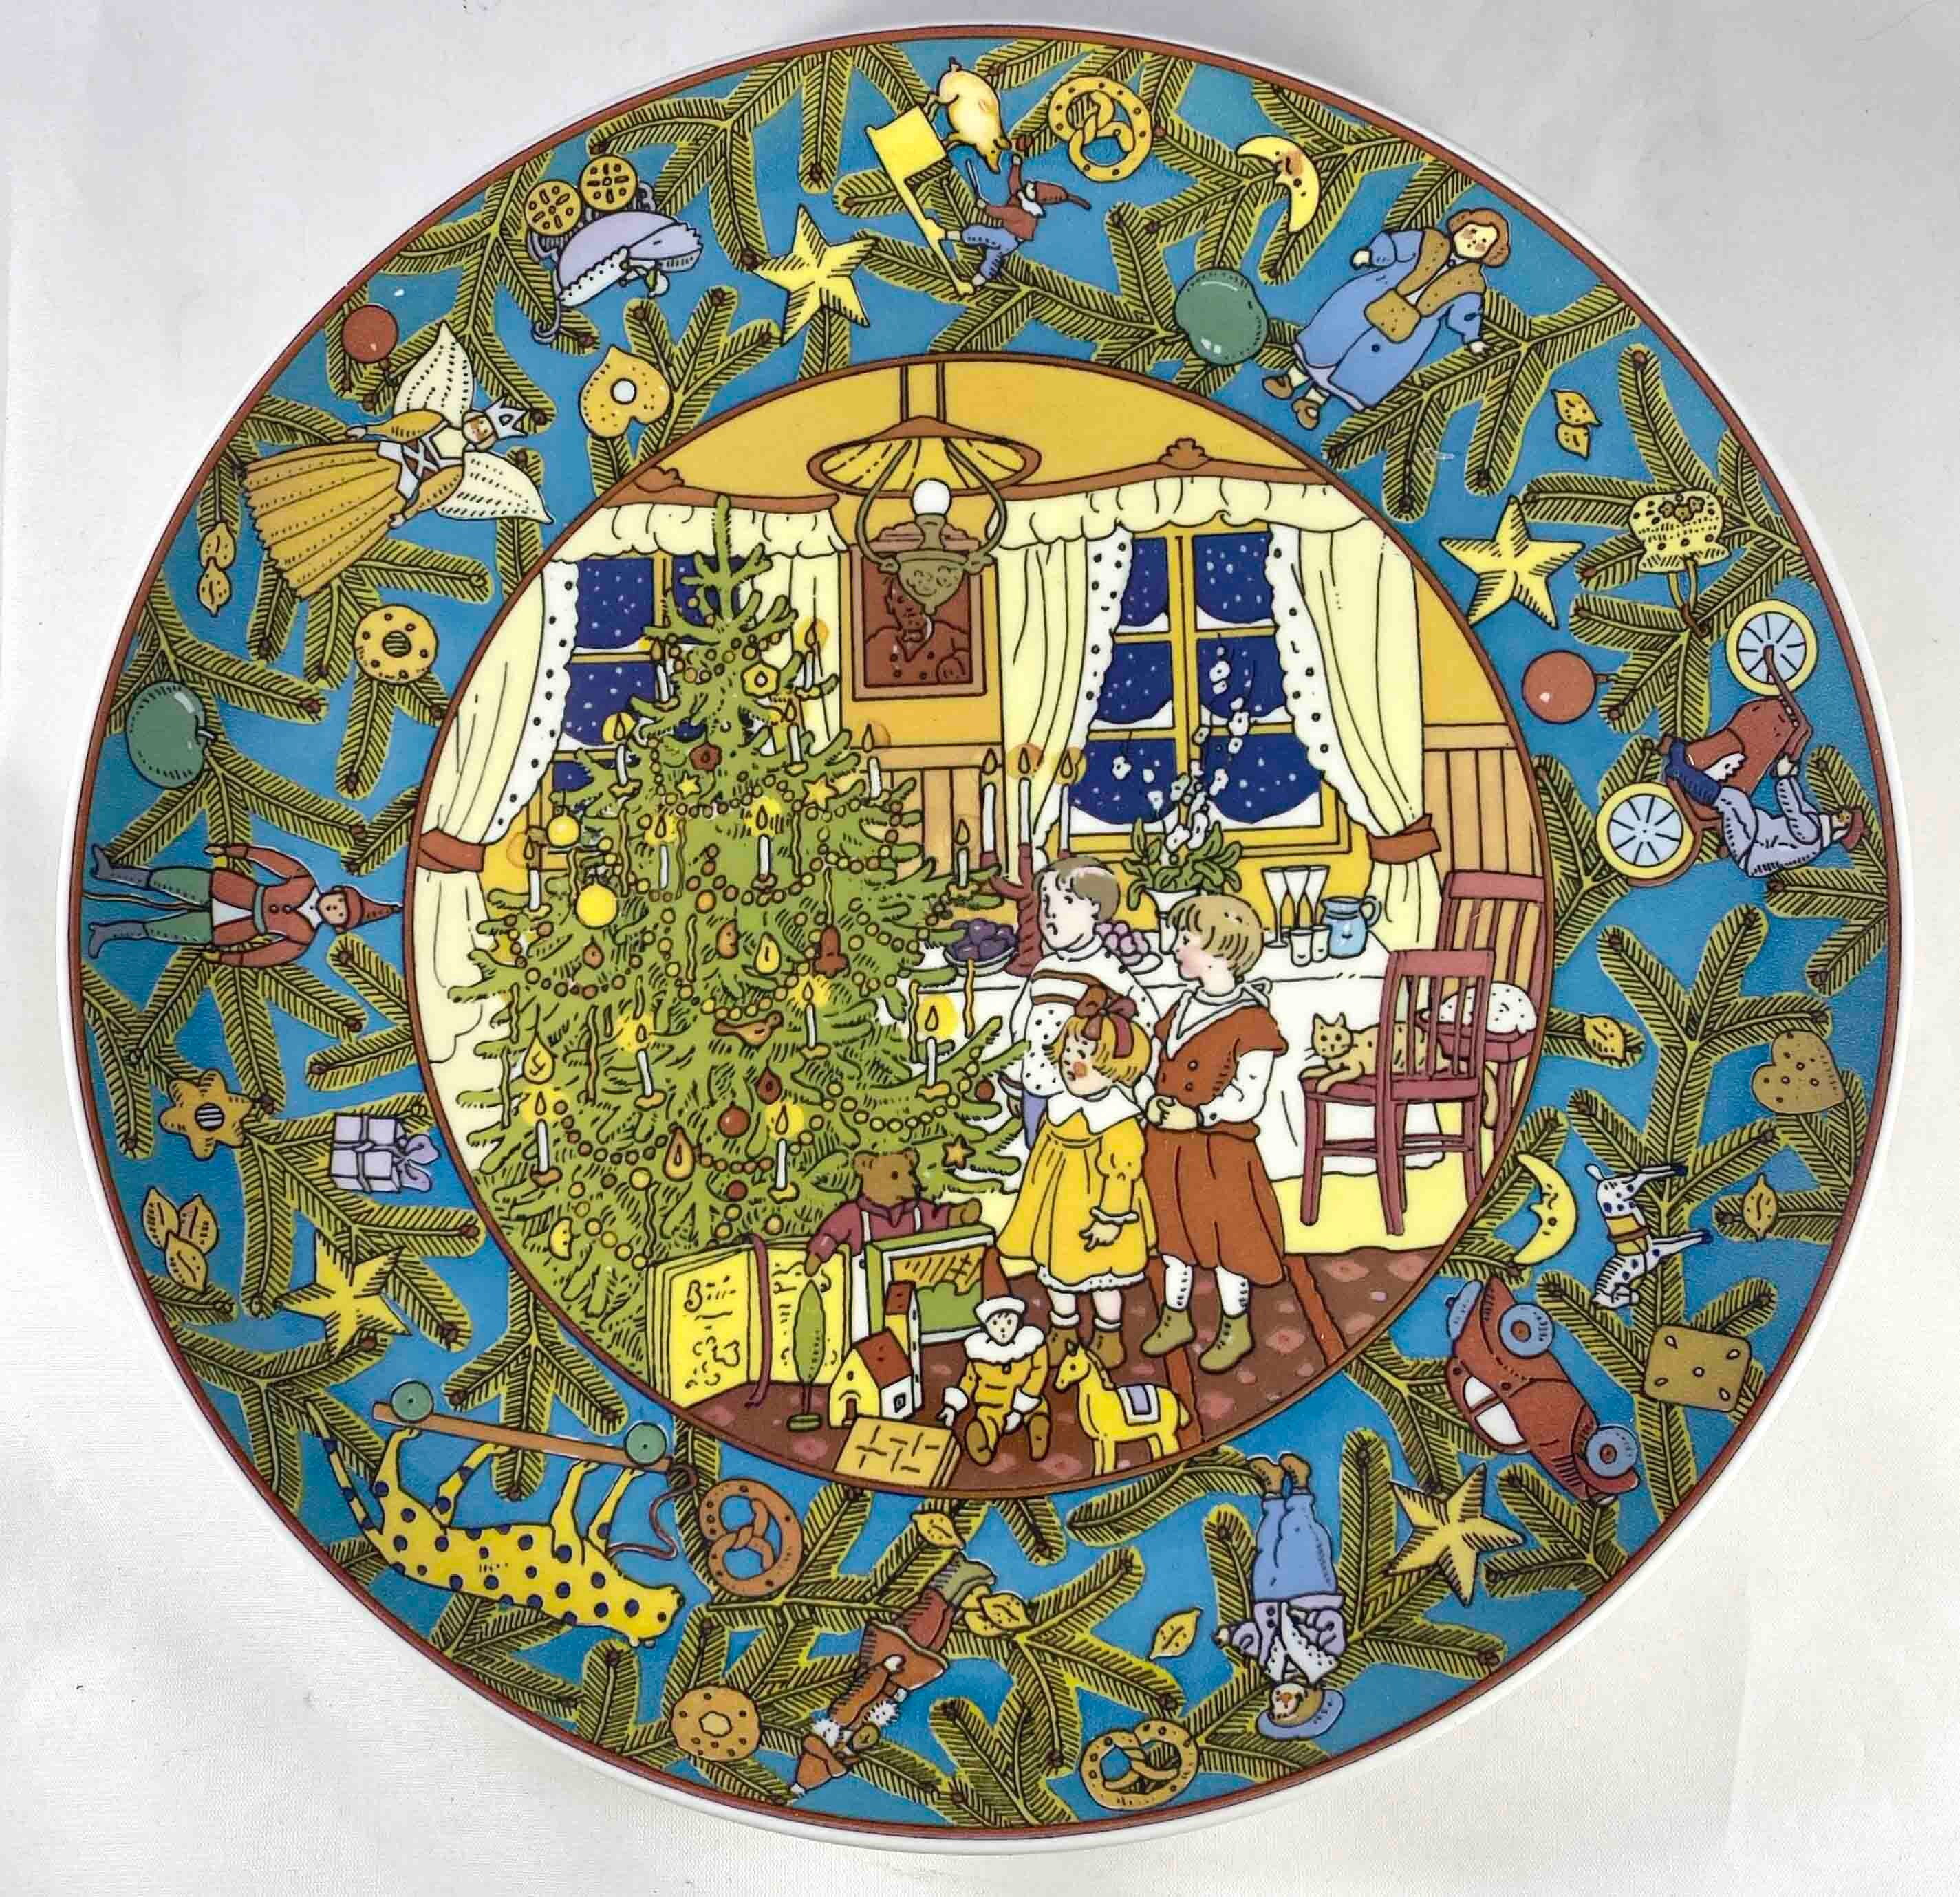 Villeroy & Boch, Christmas in Europe, ALPENLÄNDER, Christmas, Vintage Wall  Plate Gift Pastry Bowl 